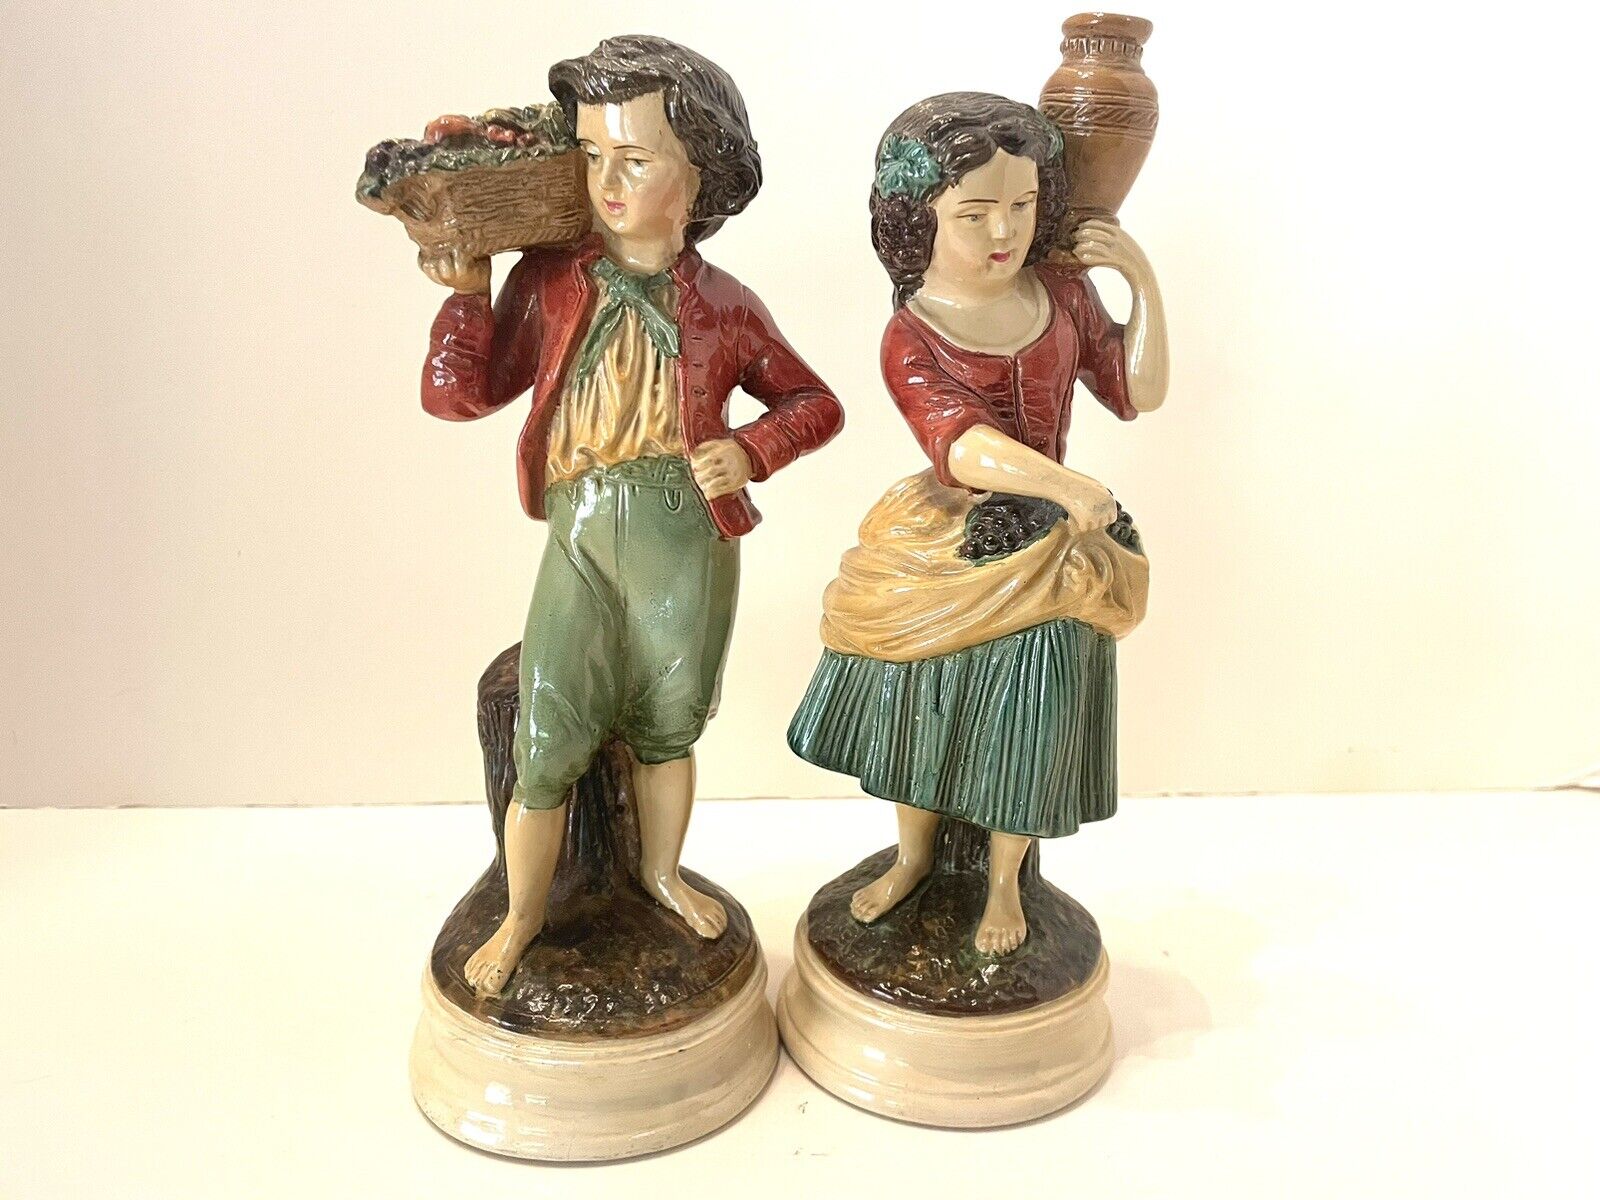 Vintage Italian Borghese Boy and Girl Chalkware Figurines Wine Grapes